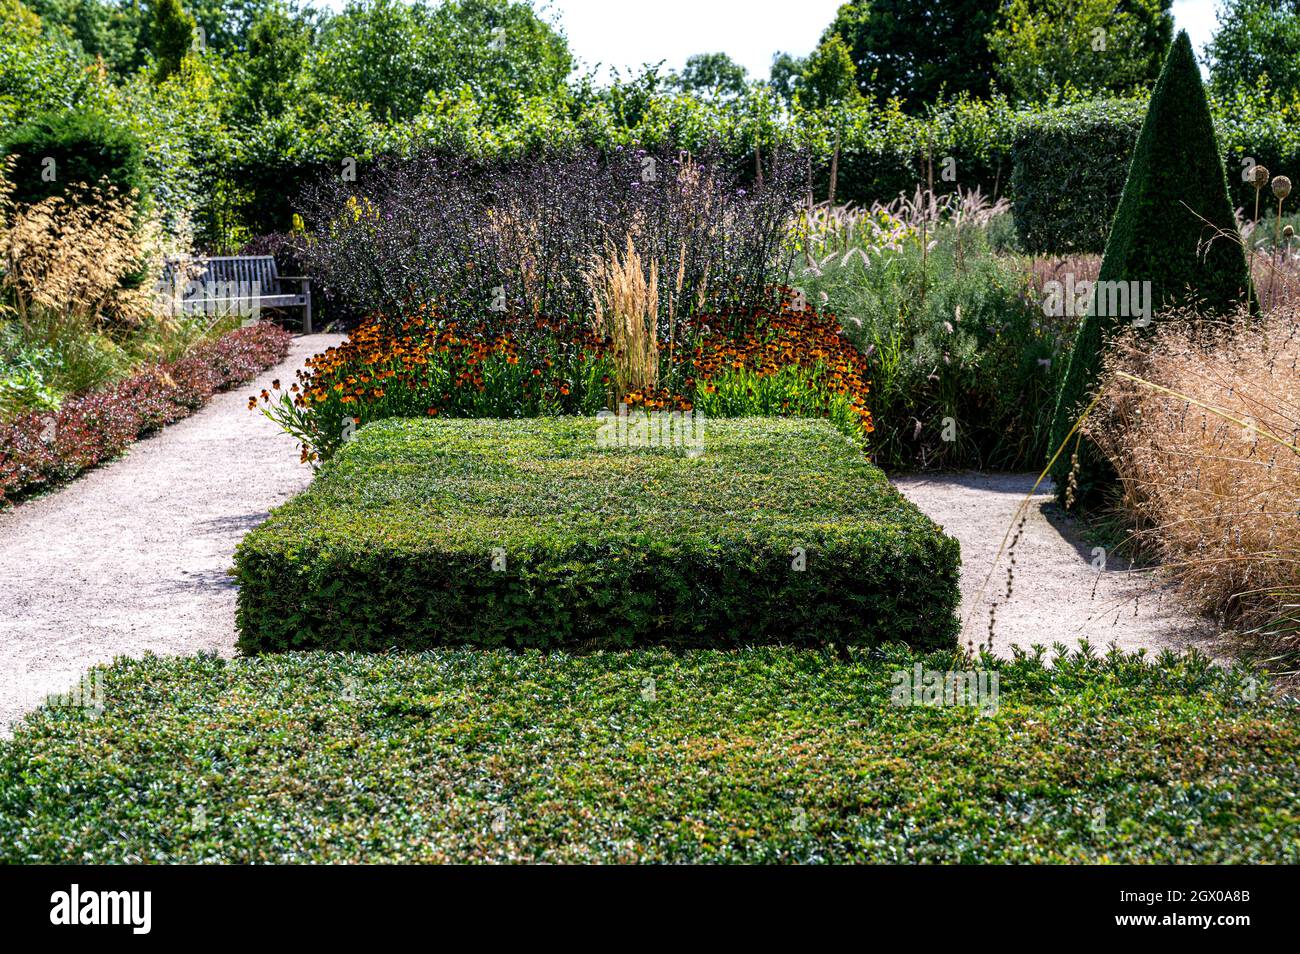 RHS Hyde Hall, Modern Country Garden. Clipped and trimmed yew and box, evergreen structure. Stock Photo